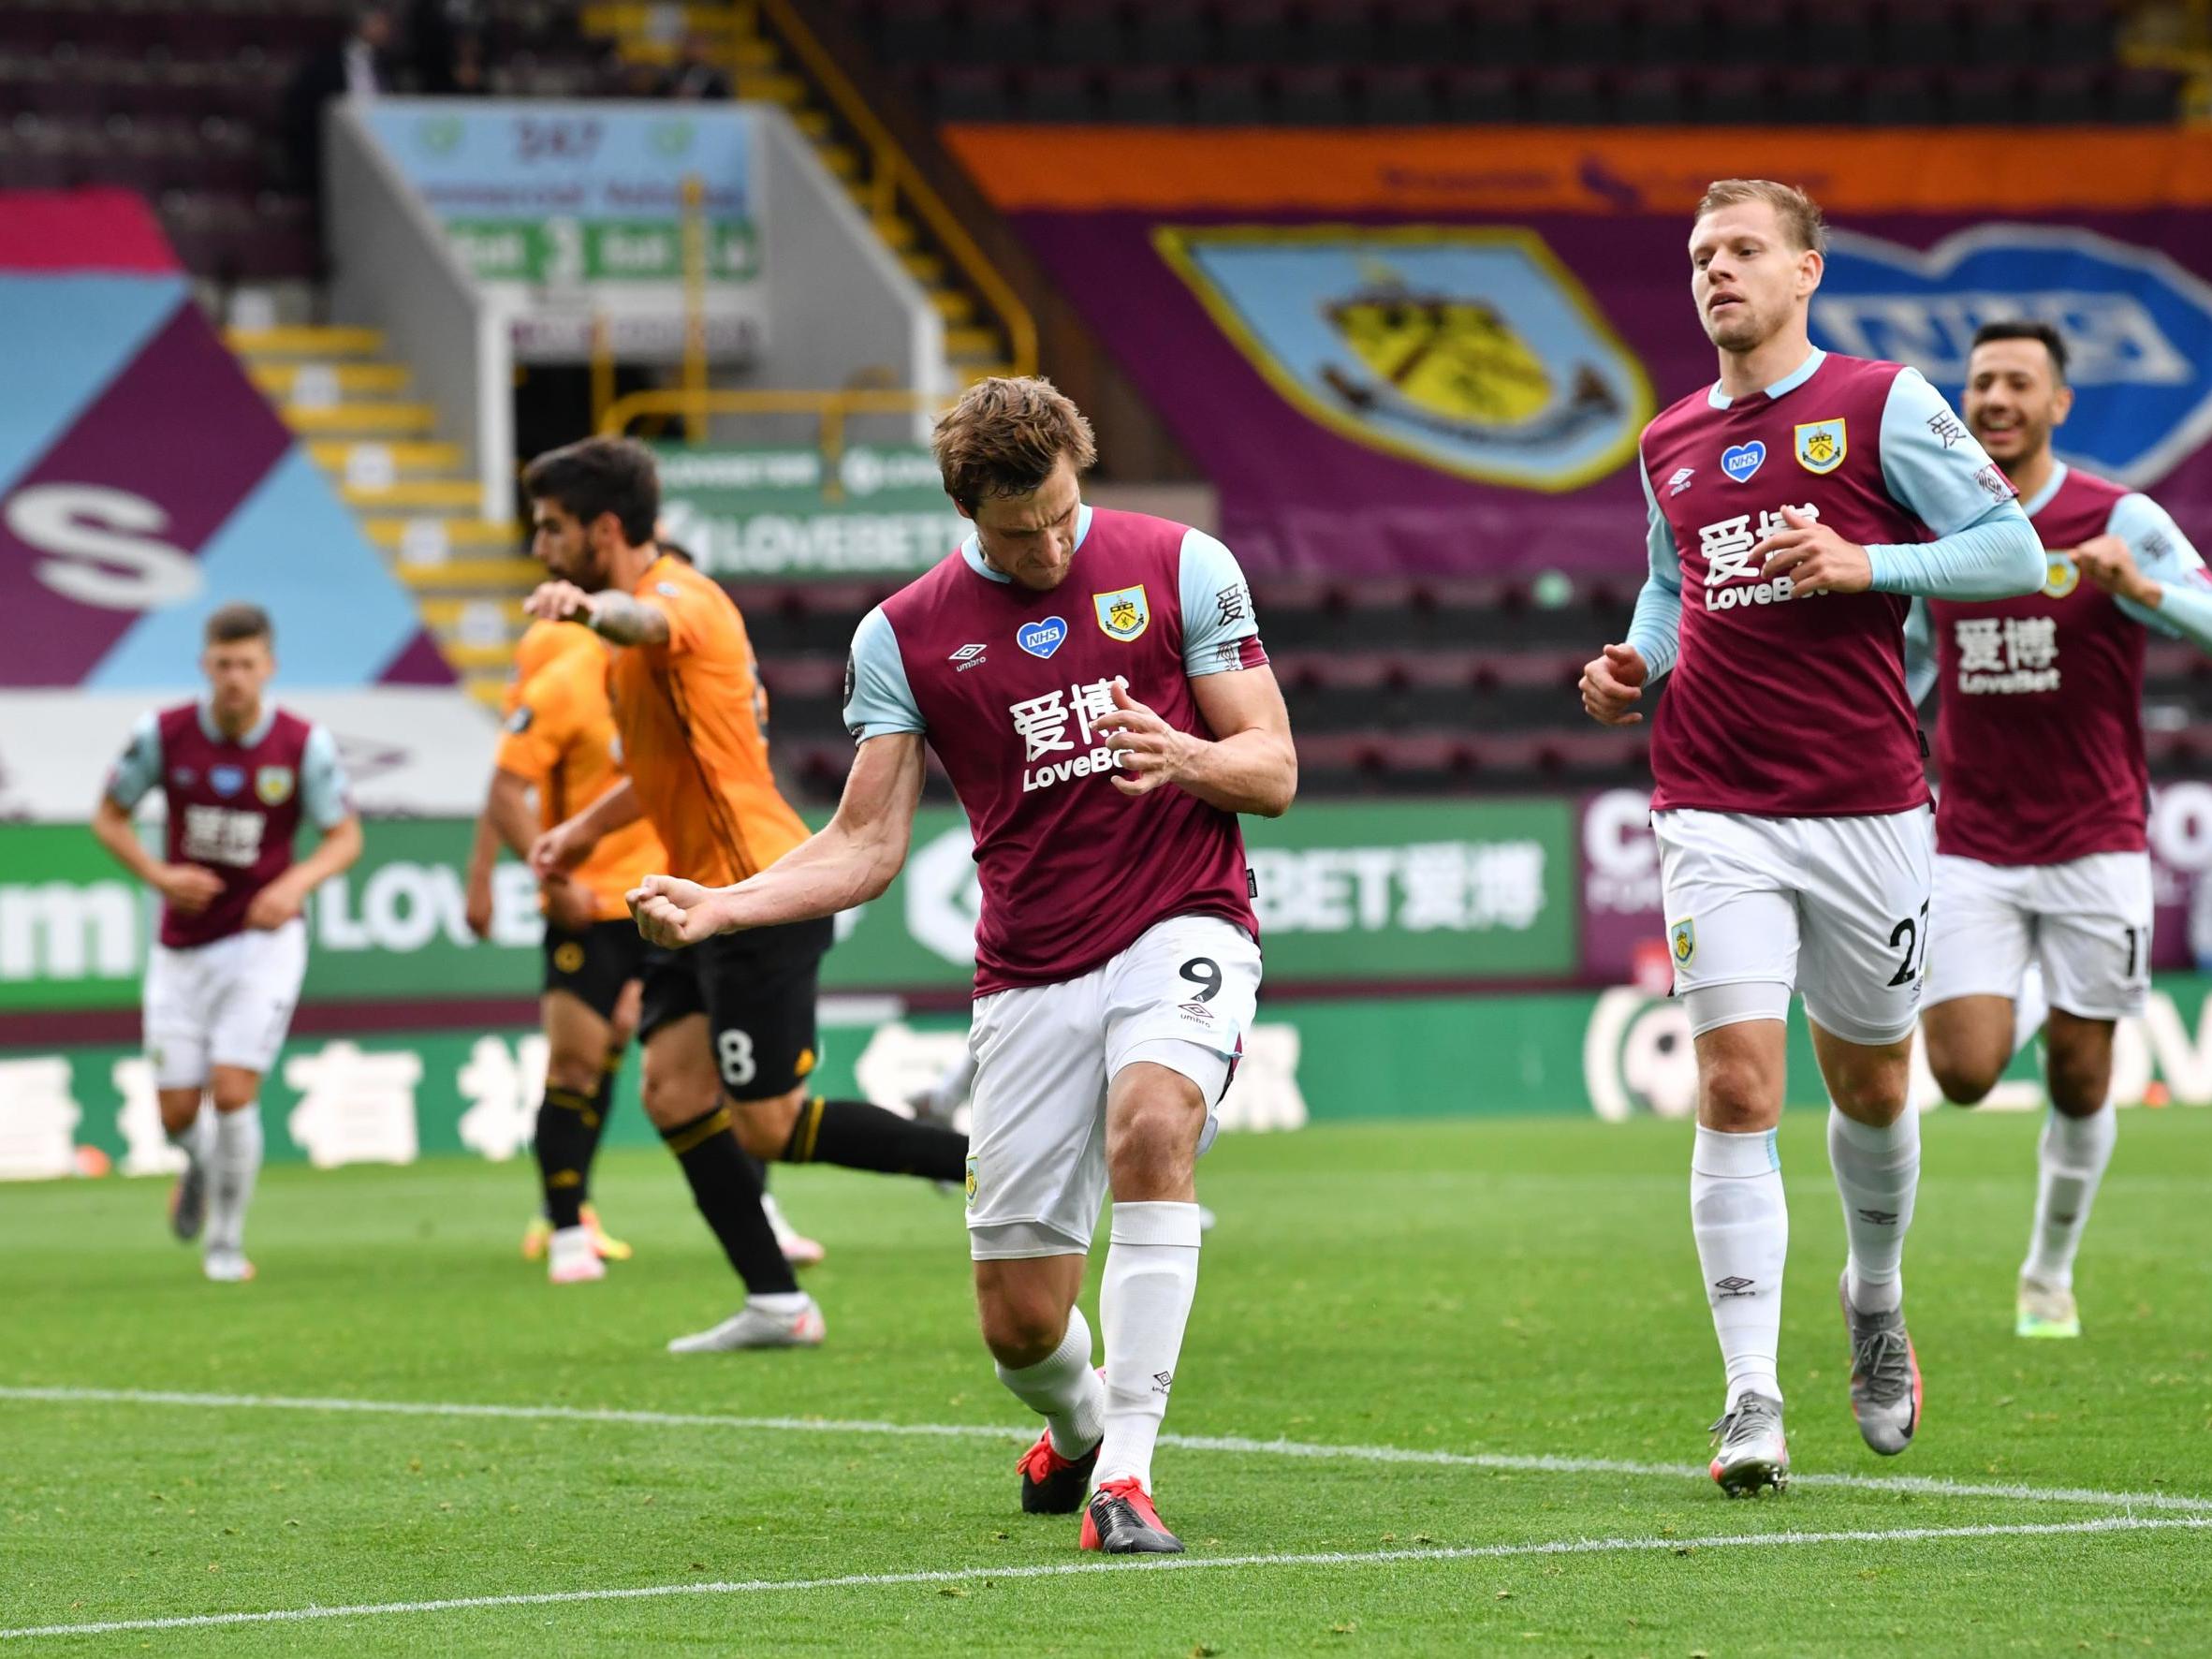 Burnley Vs Wolves Result Final Score Goals And Report The Independent The Independent